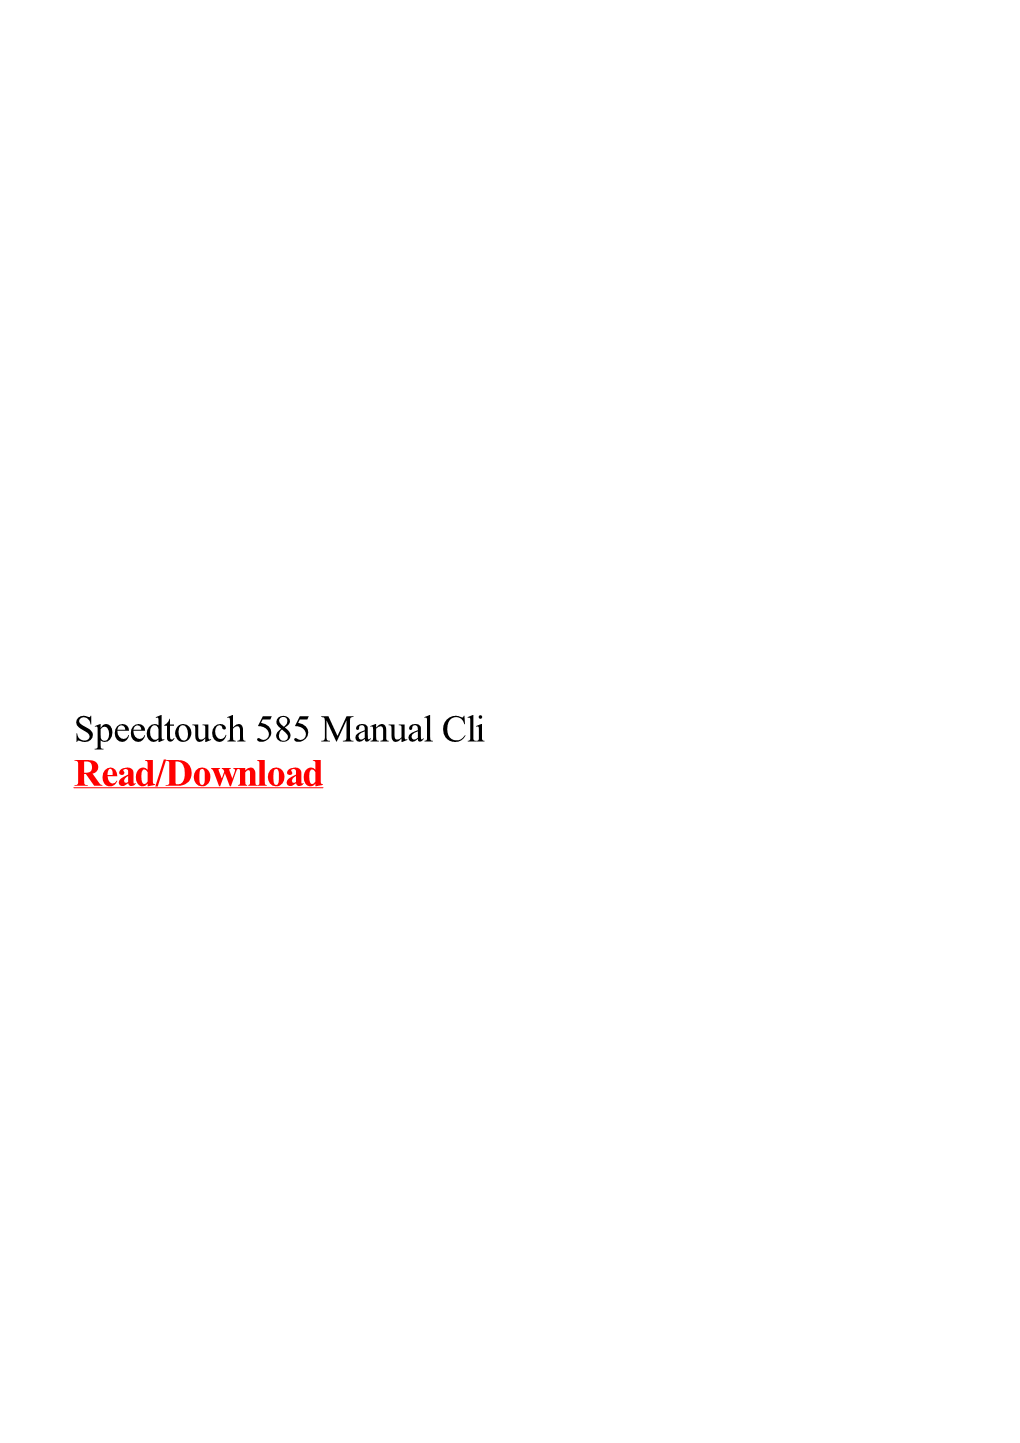 Speedtouch 585 Manual Cli